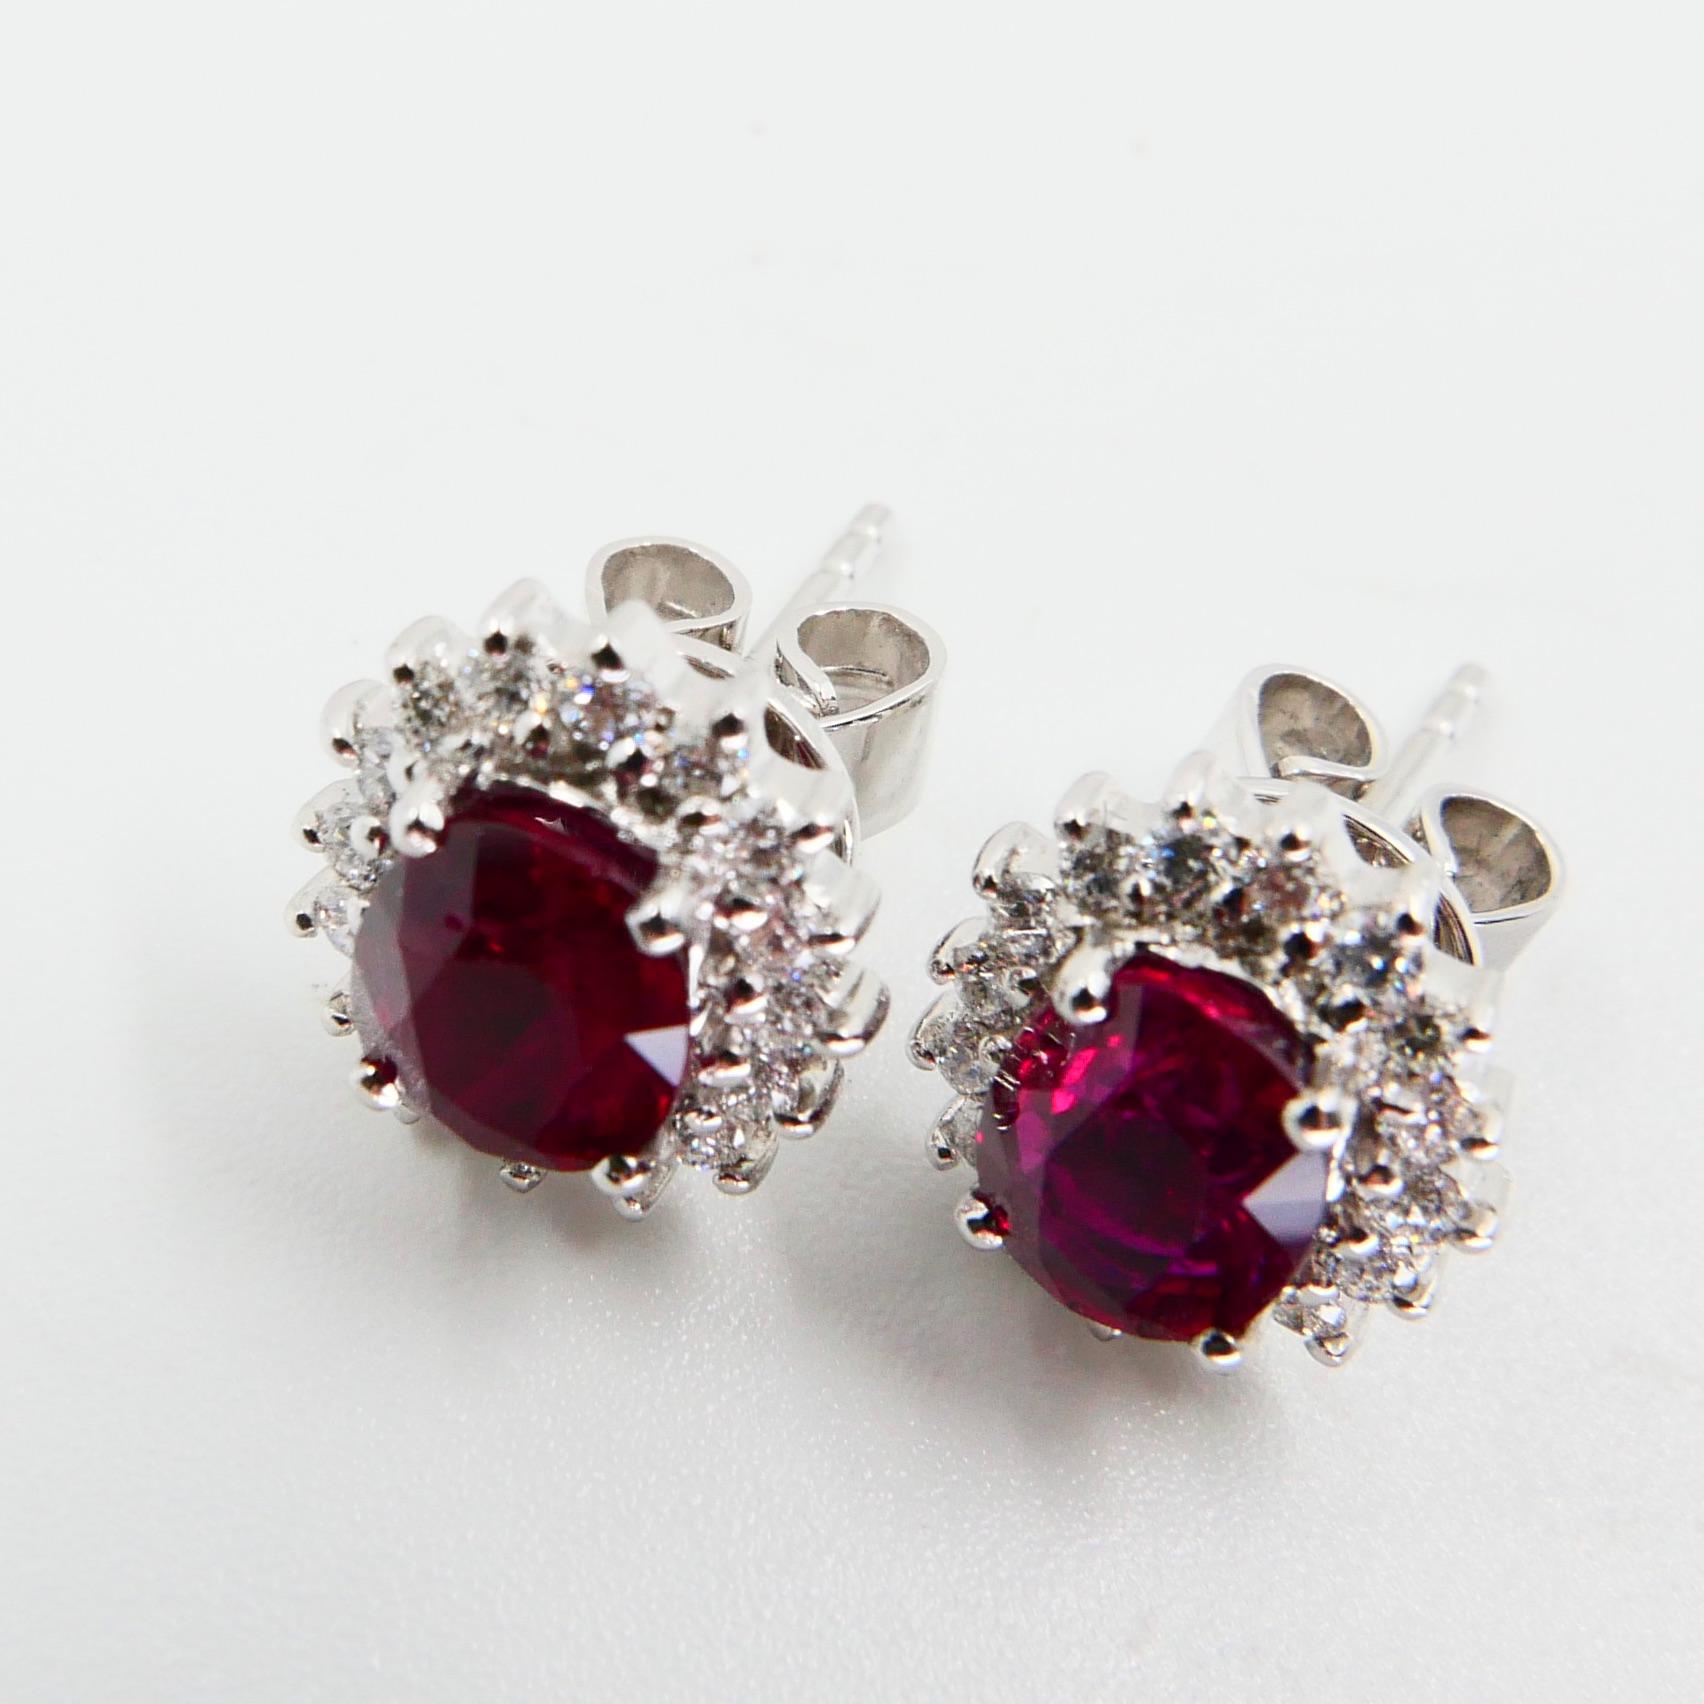 Vivid Red Ruby 2.09 Carat and Diamond Stud Earrings, Close to Pigeon Blood Red 2